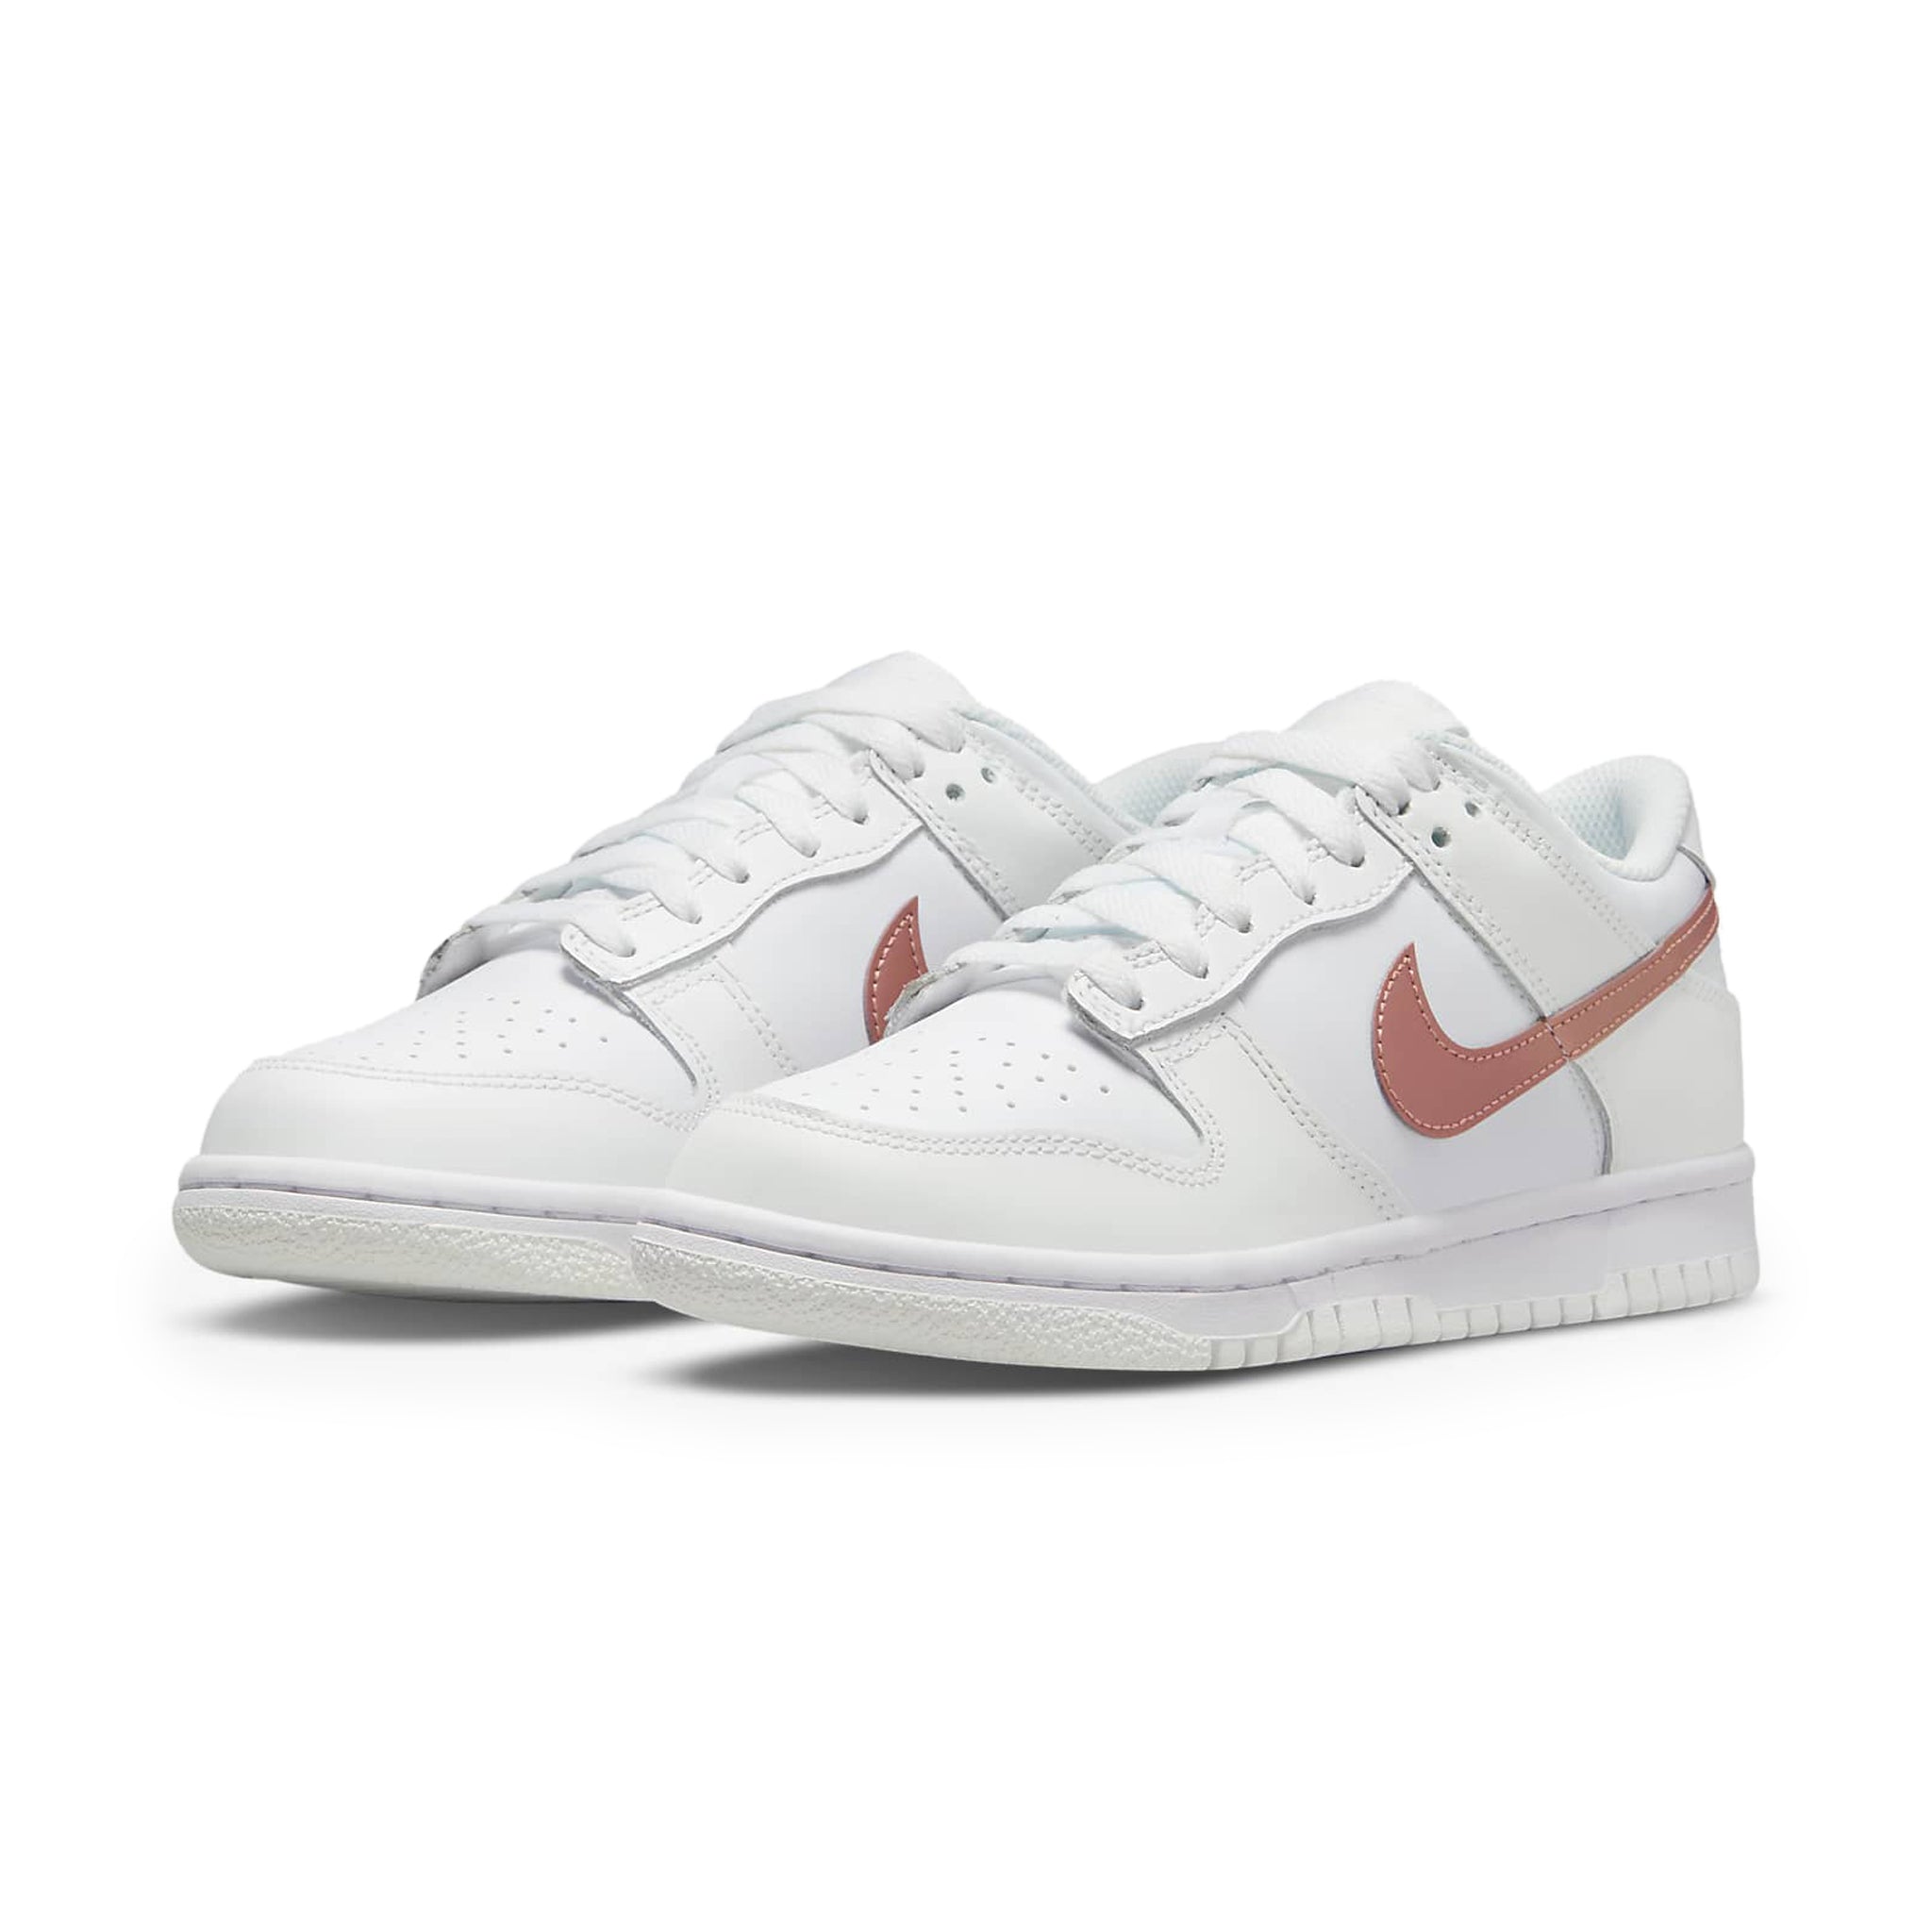 nike dunk low white pink gs dh9765 100 front side